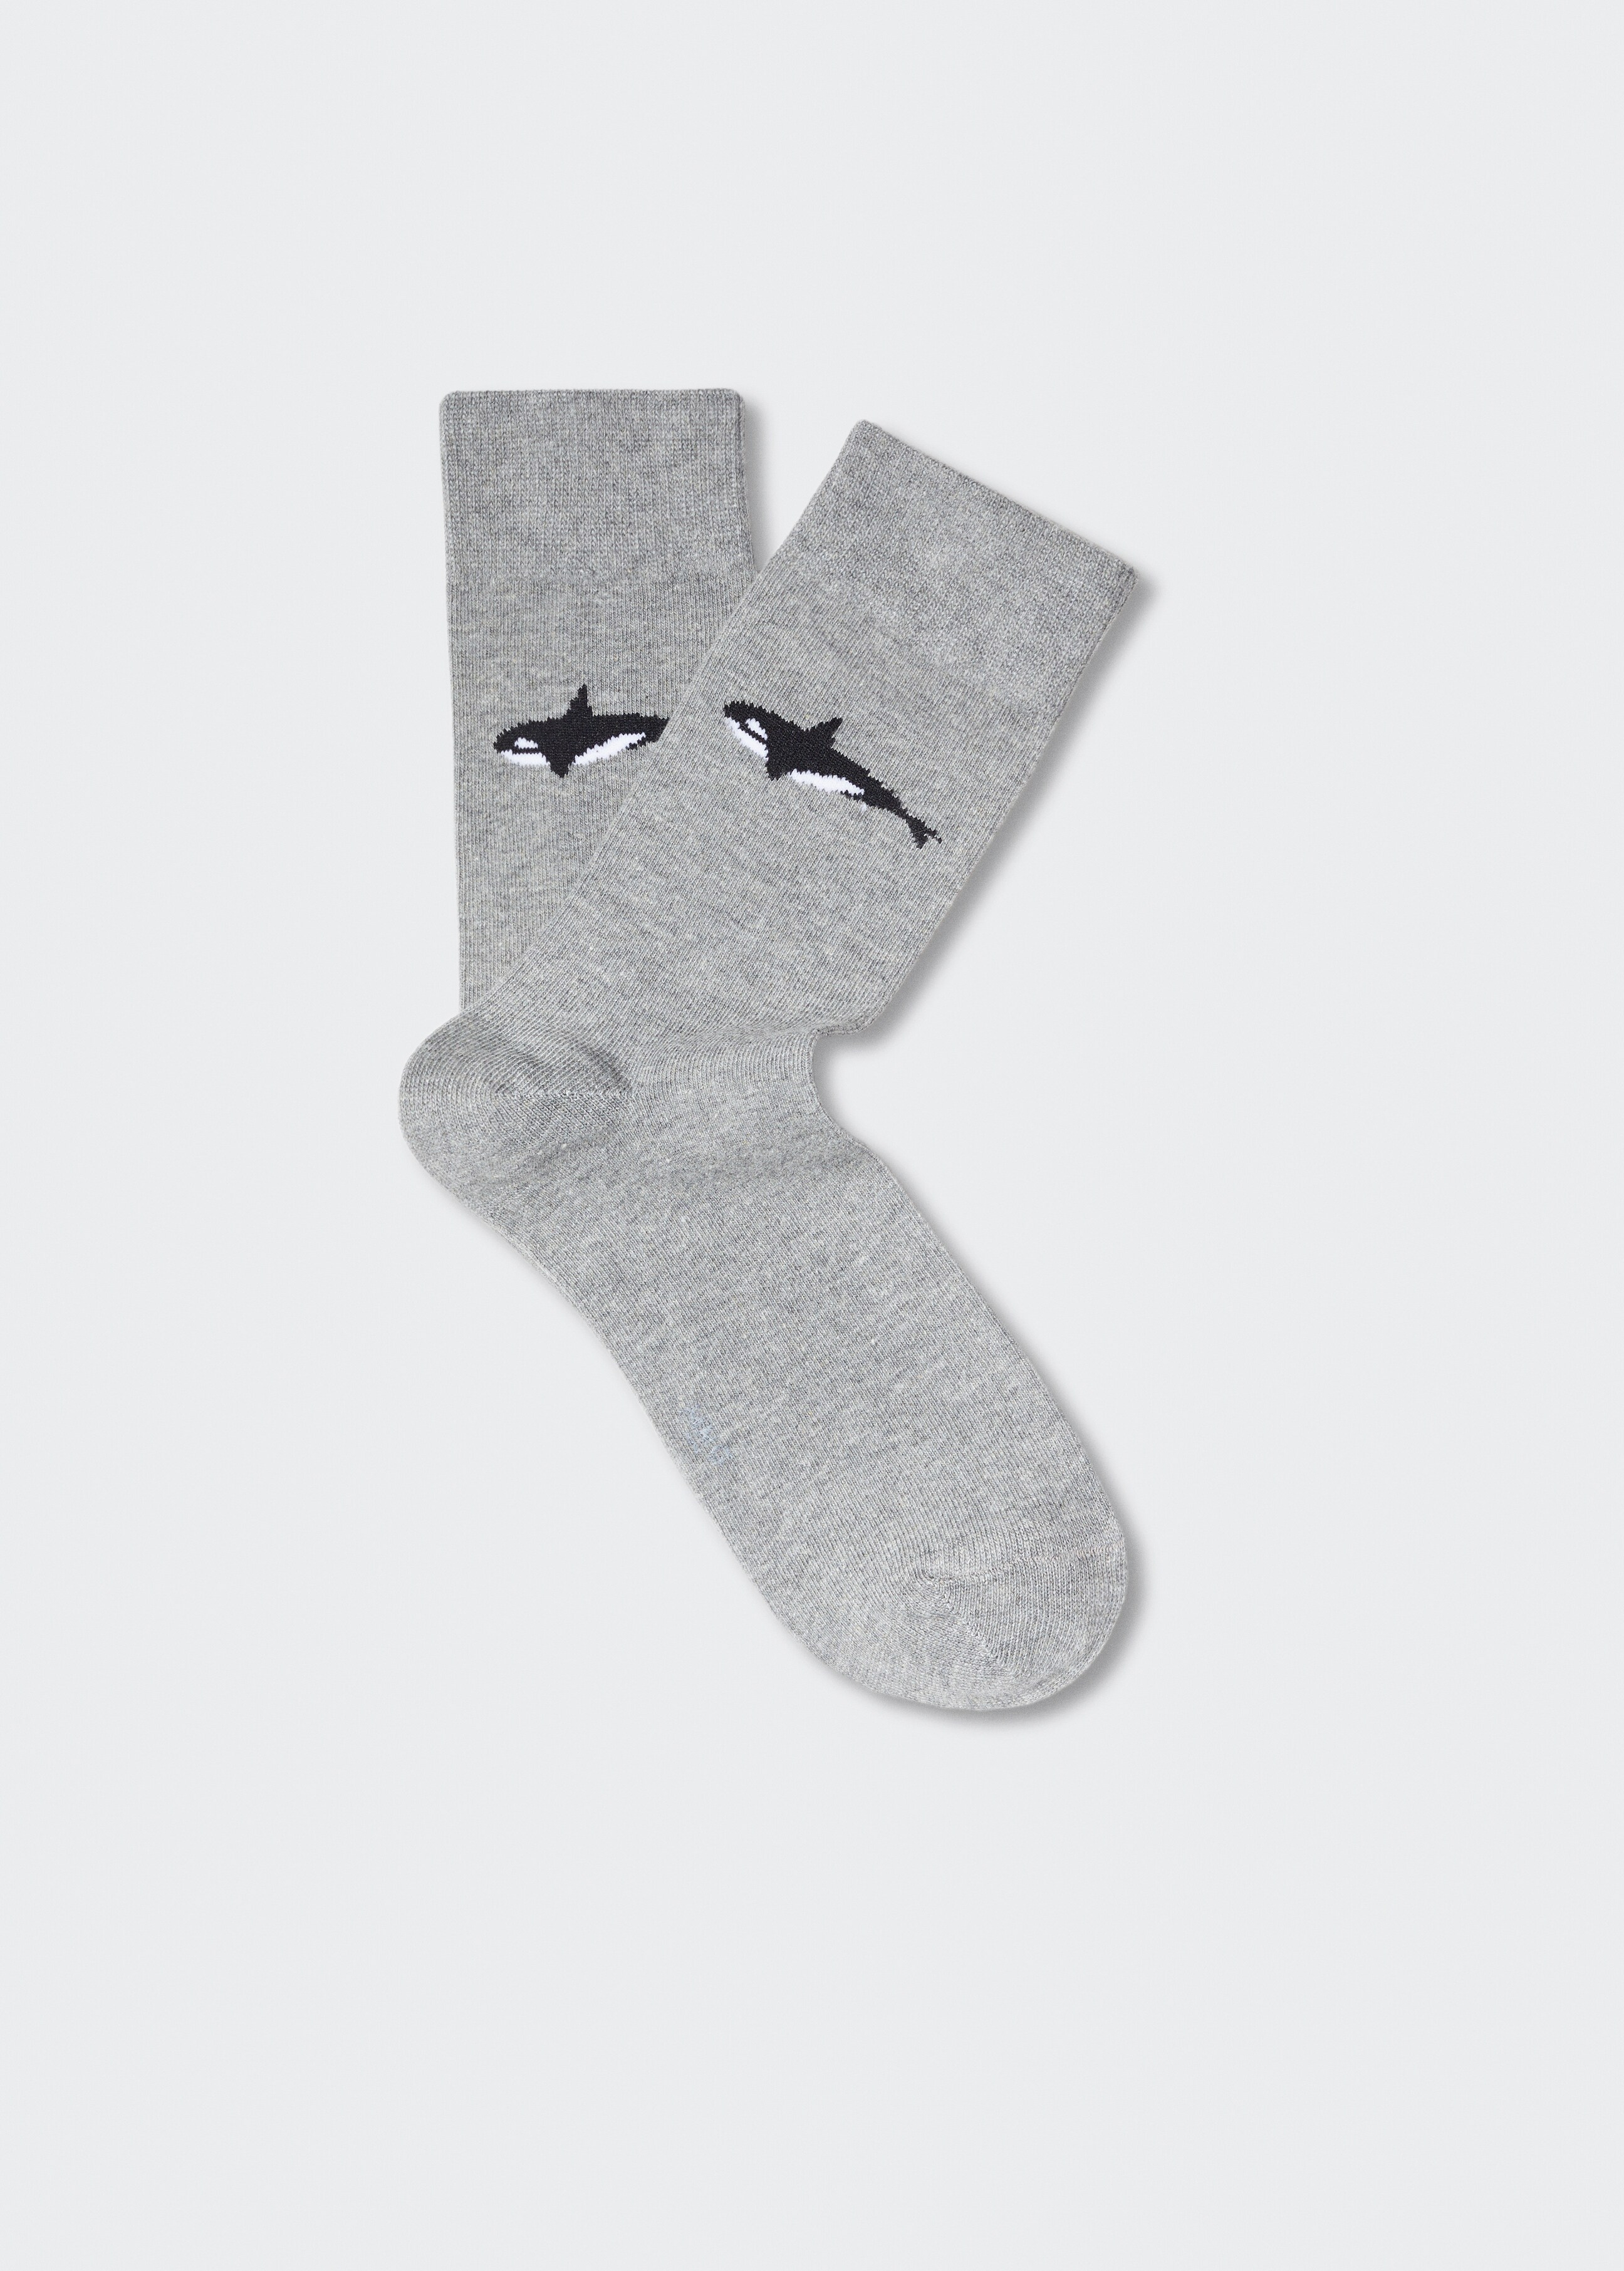 Animal print cotton socks - Article without model